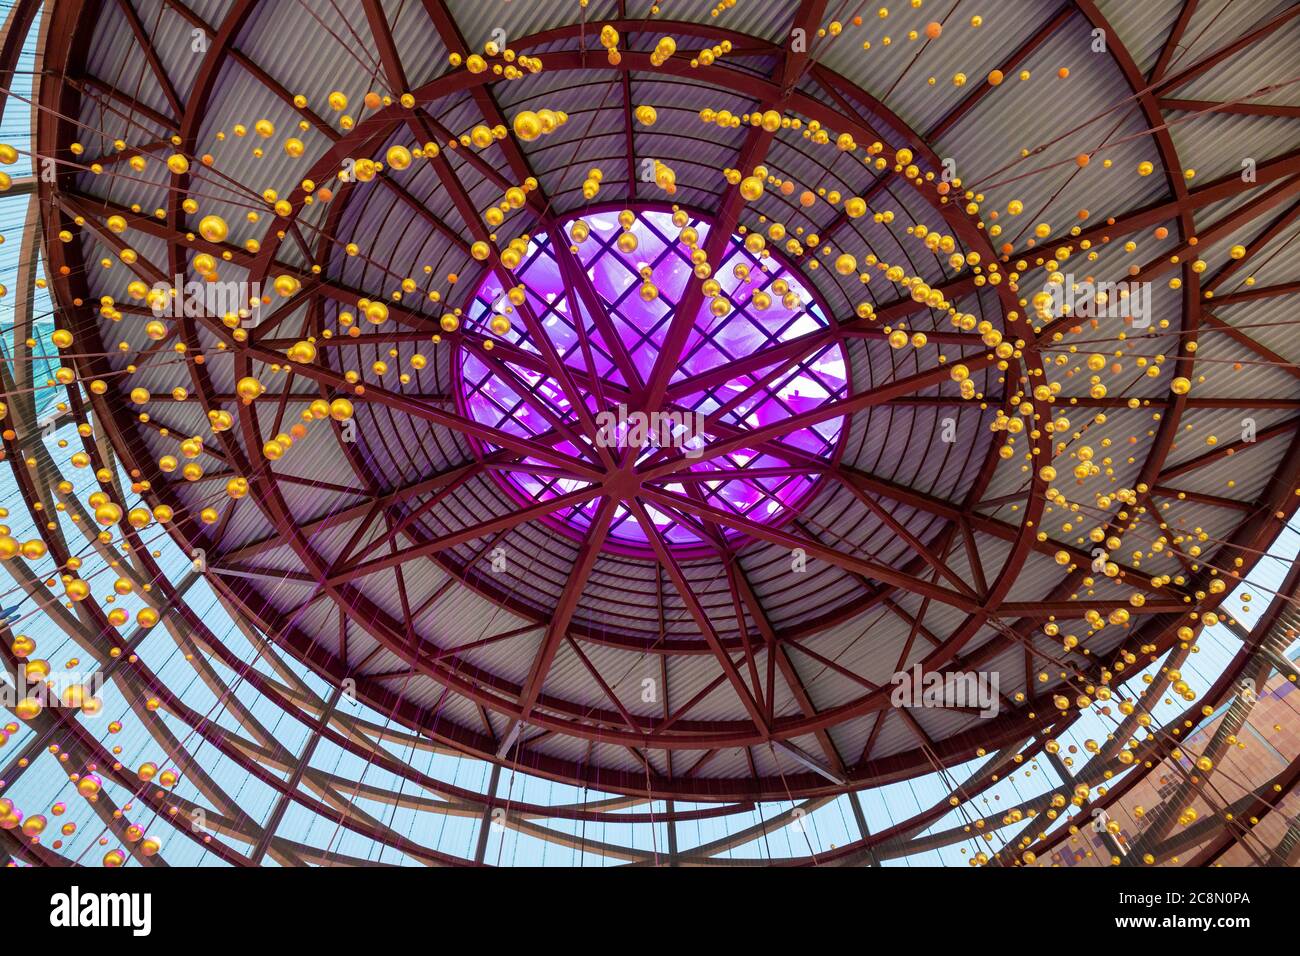 'The Aerial,' a sculpture hanging at the Robert H. Lorsch Family Pavilion at the California Science Center in Los Angeles. Stock Photo